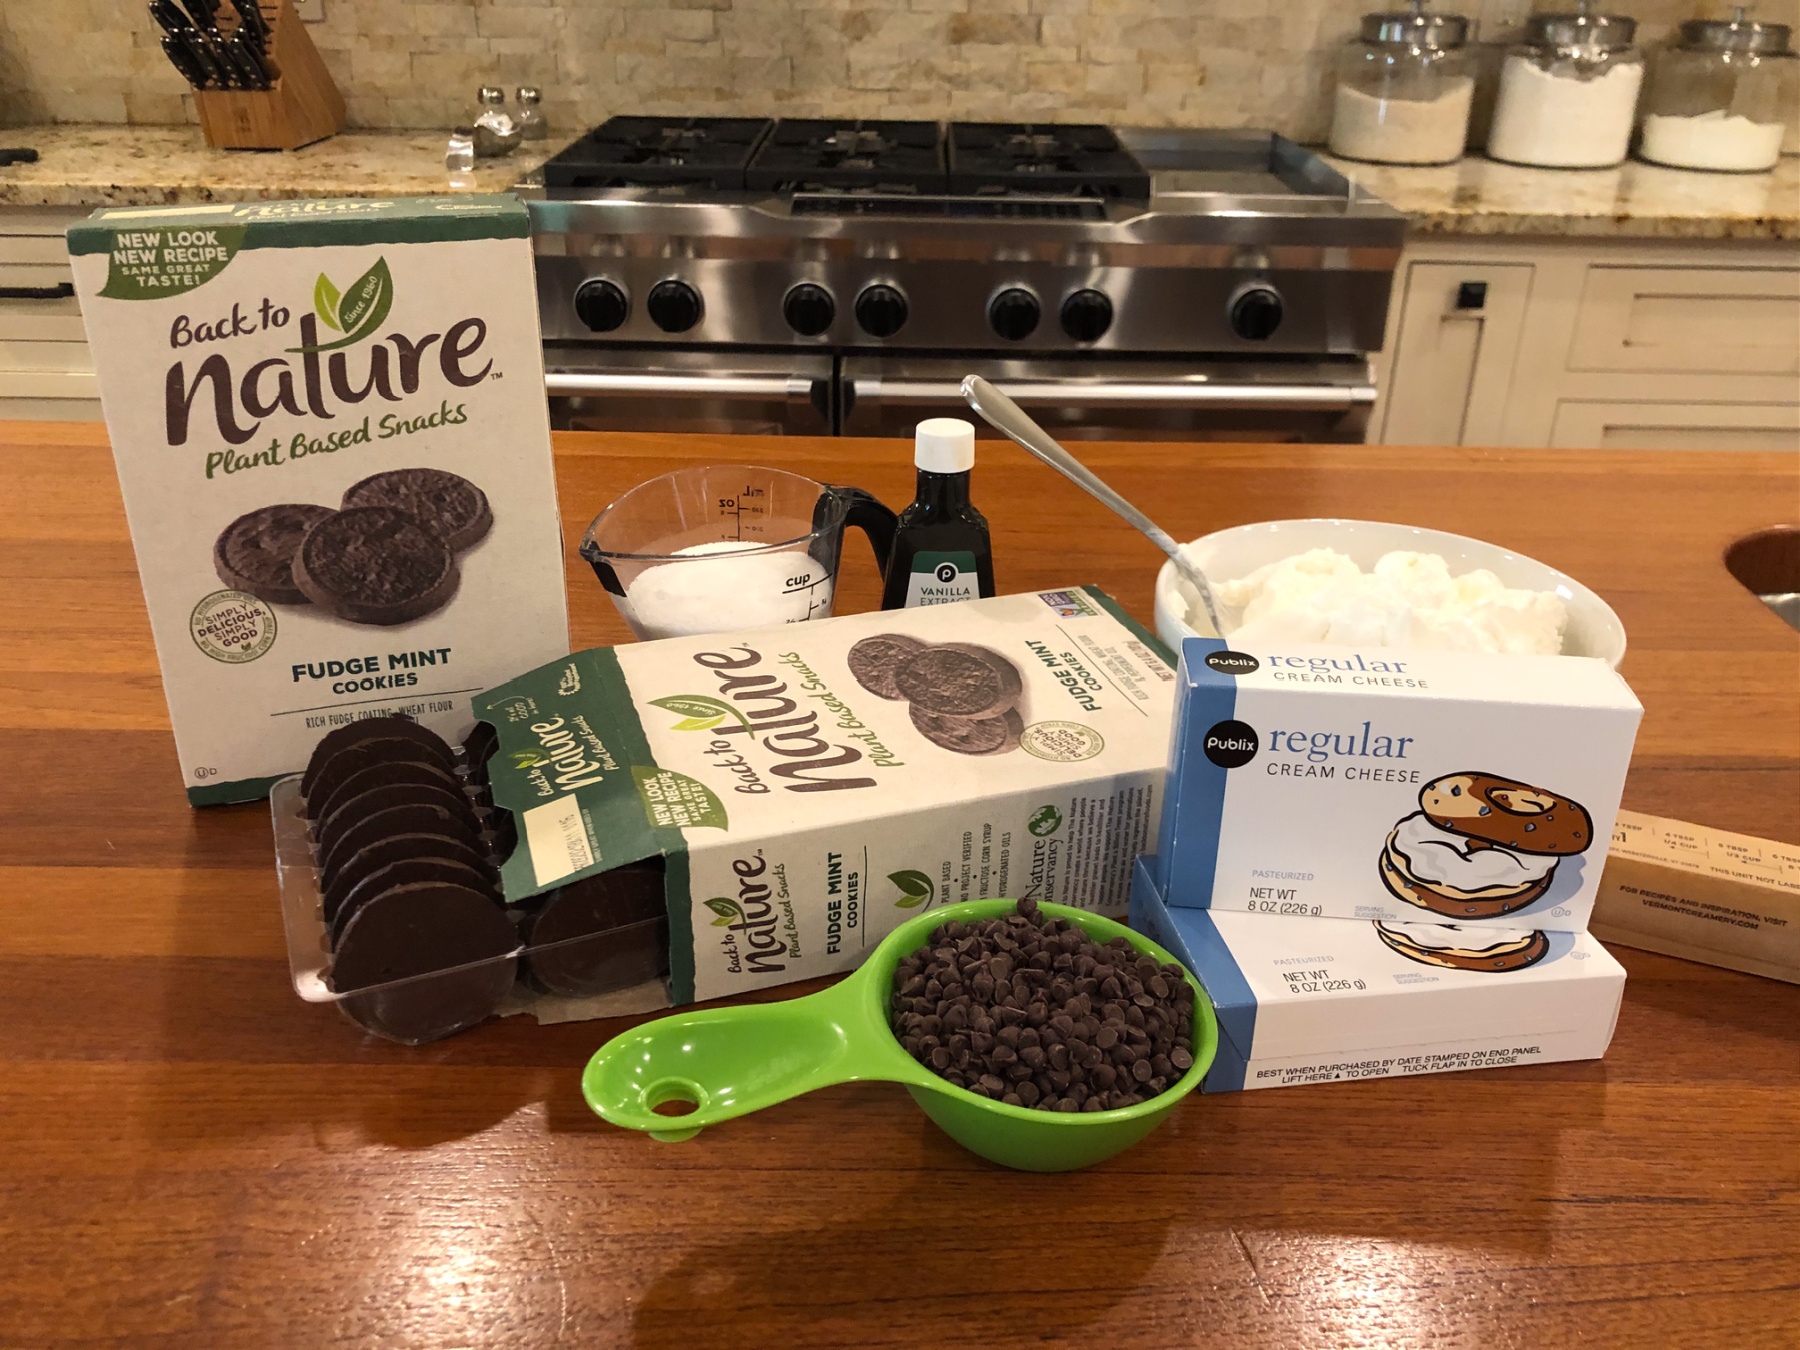 Try My Mint Chocolate Chip Cheesecake Squared & Get Savings On Back To Nature™ Snacks At Publix on I Heart Publix